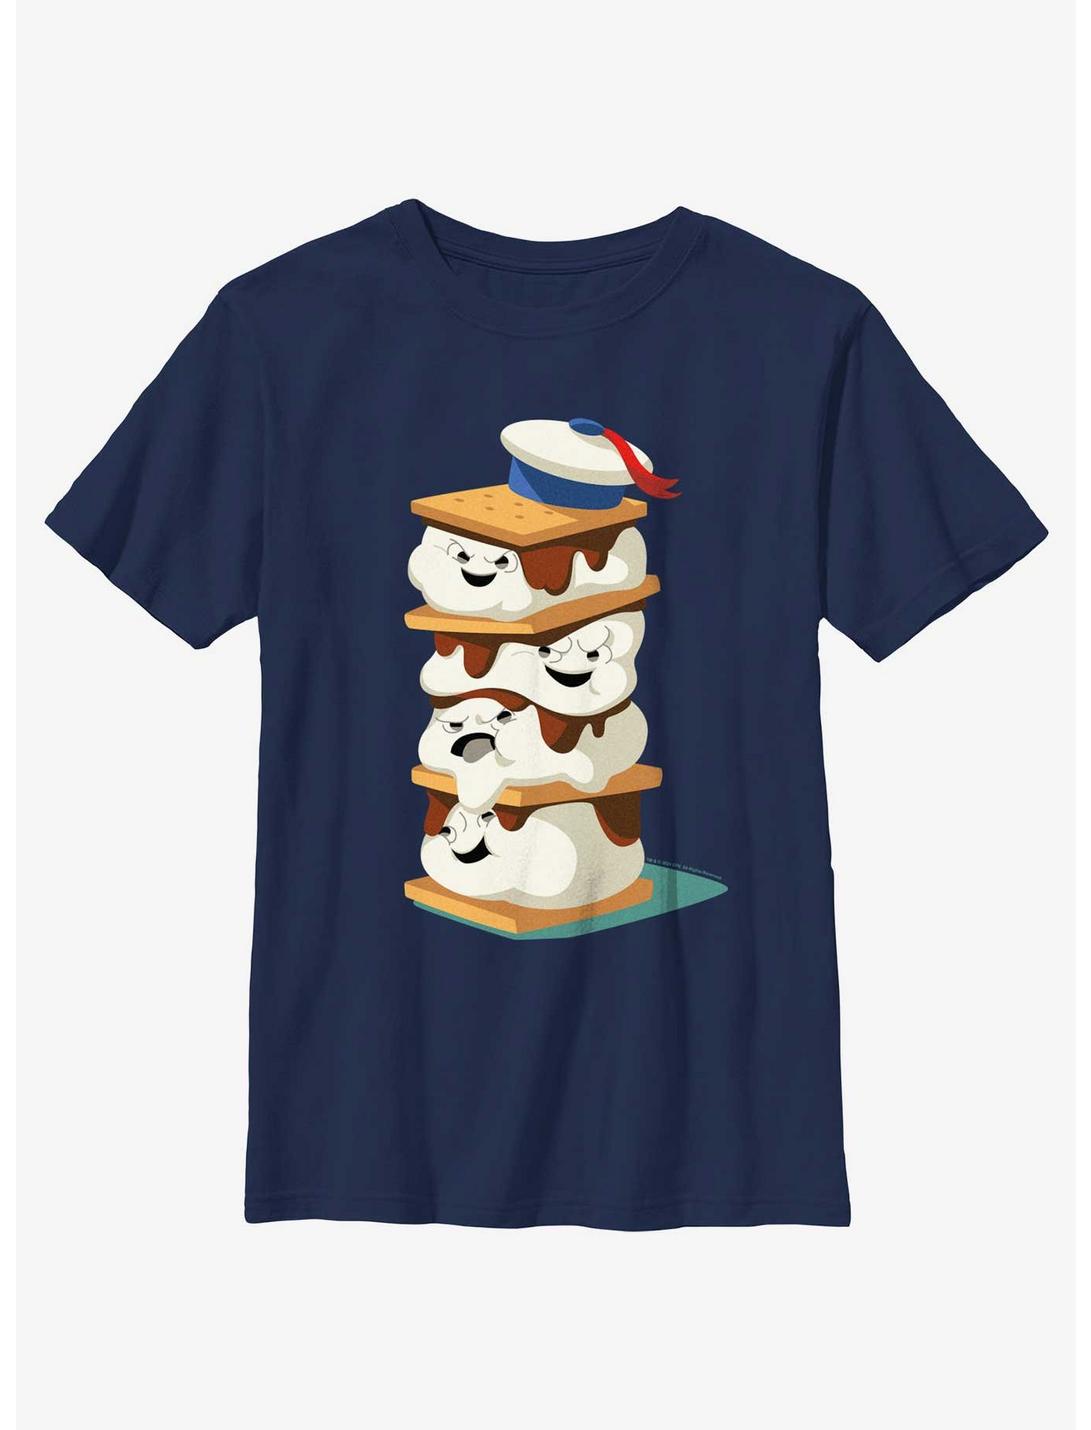 Ghostbusters: Frozen Empire Mini Puft Marshmallow Smores Youth T-Shirt, NAVY, hi-res